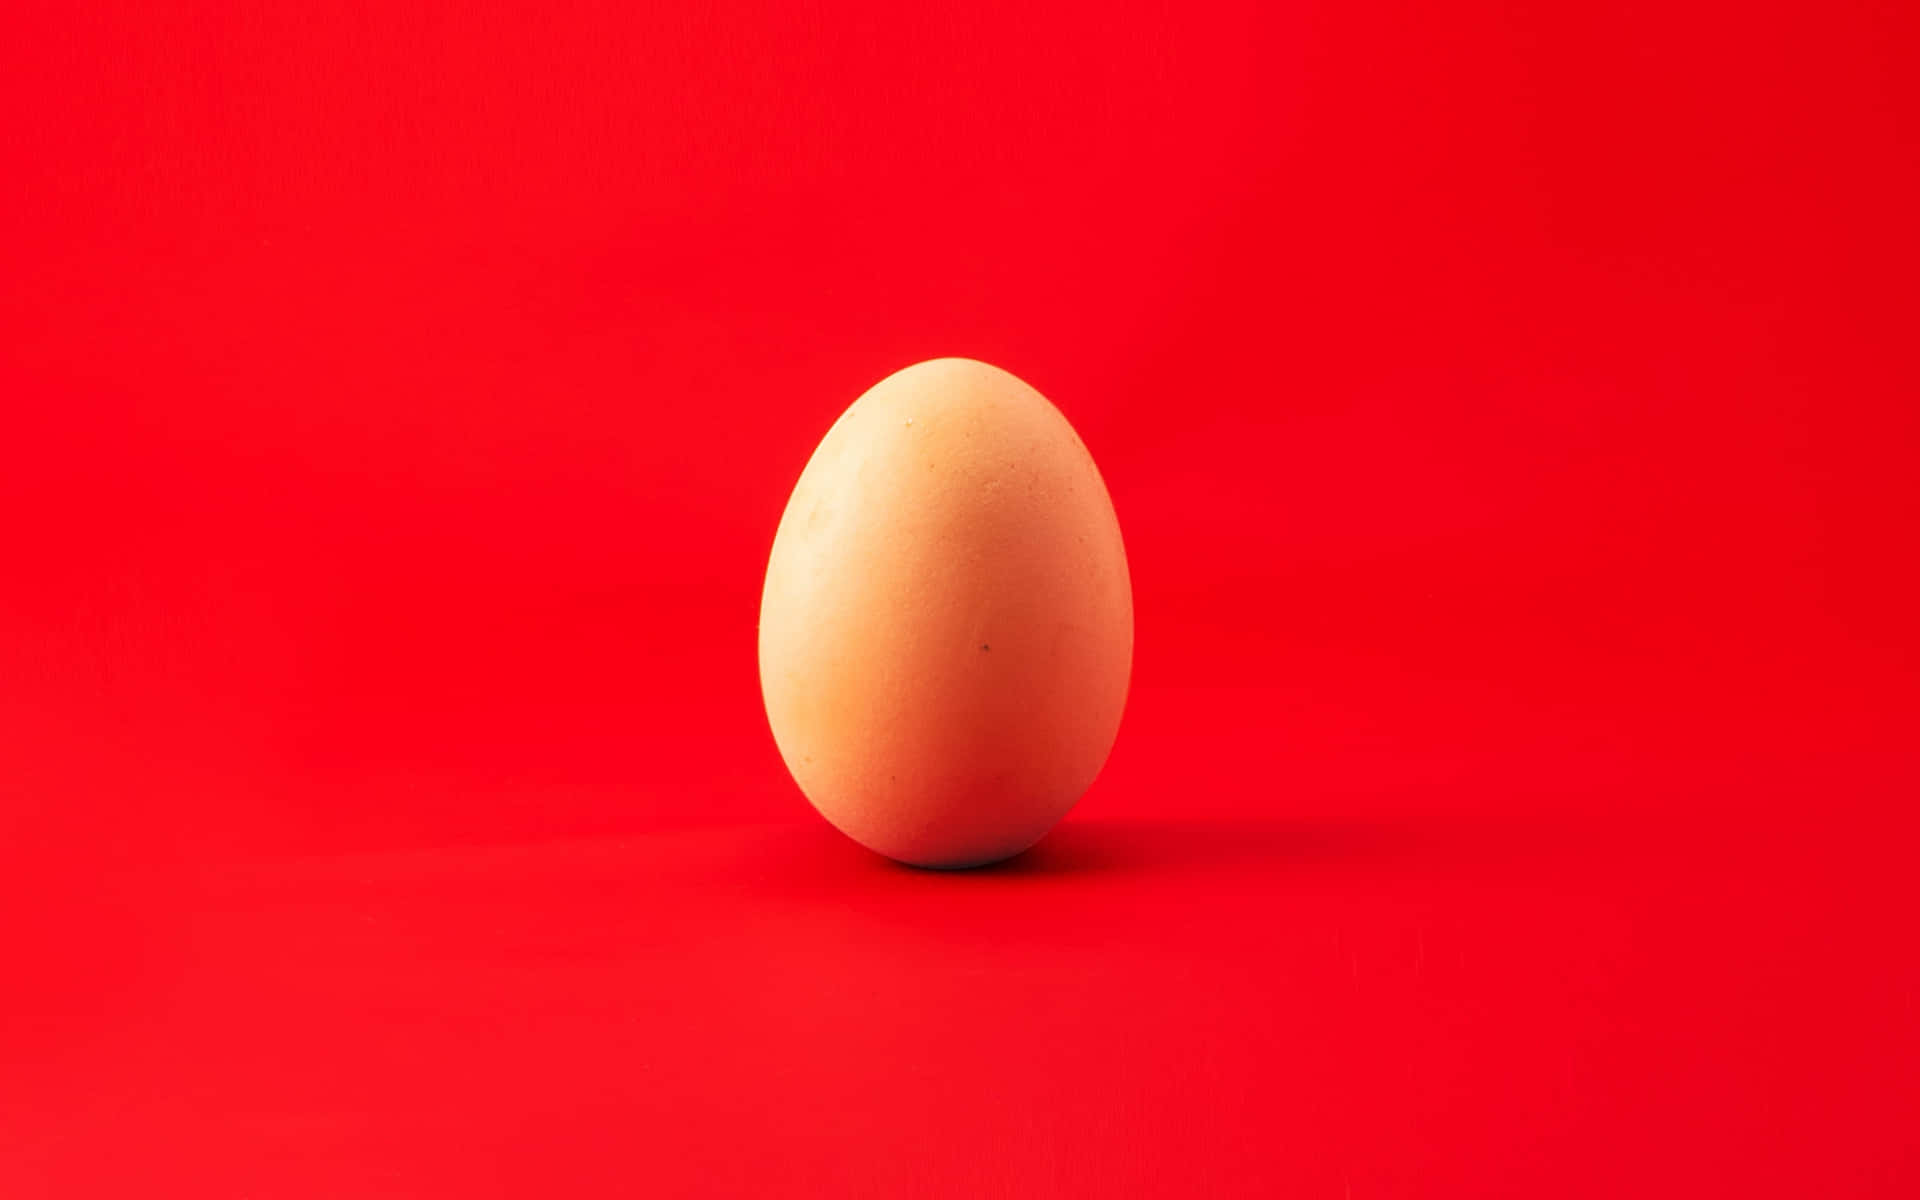 An Egg On A Red Background